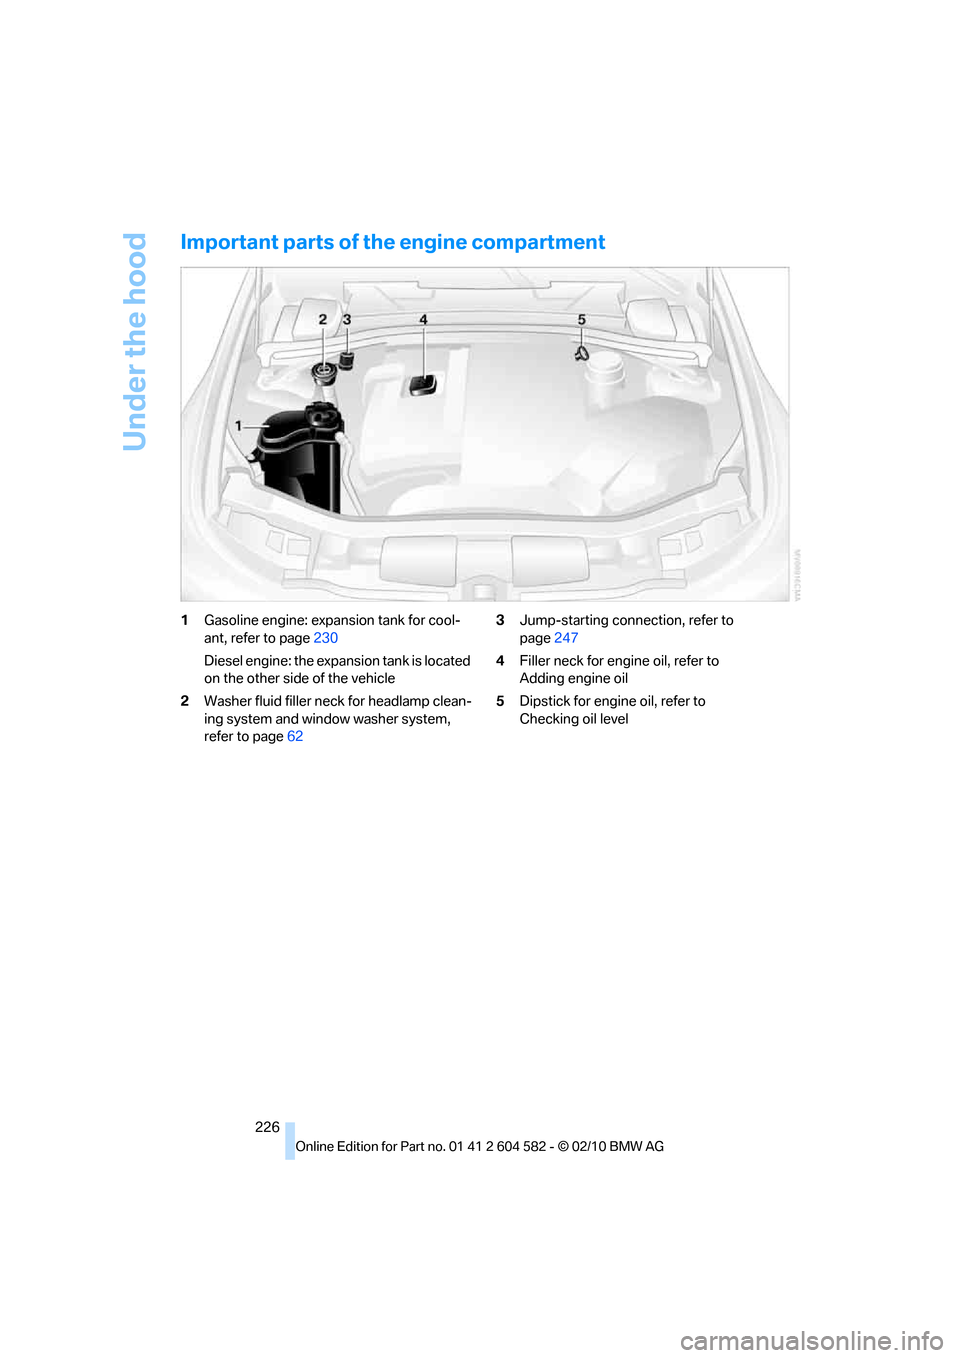 BMW 328I 2011 E90 Owners Manual Under the hood
226
Important parts of the engine compartment
1Gasoline engine: expansion tank for cool-
ant, refer to page230
Diesel engine: the expansion tank is located 
on the other side of the veh